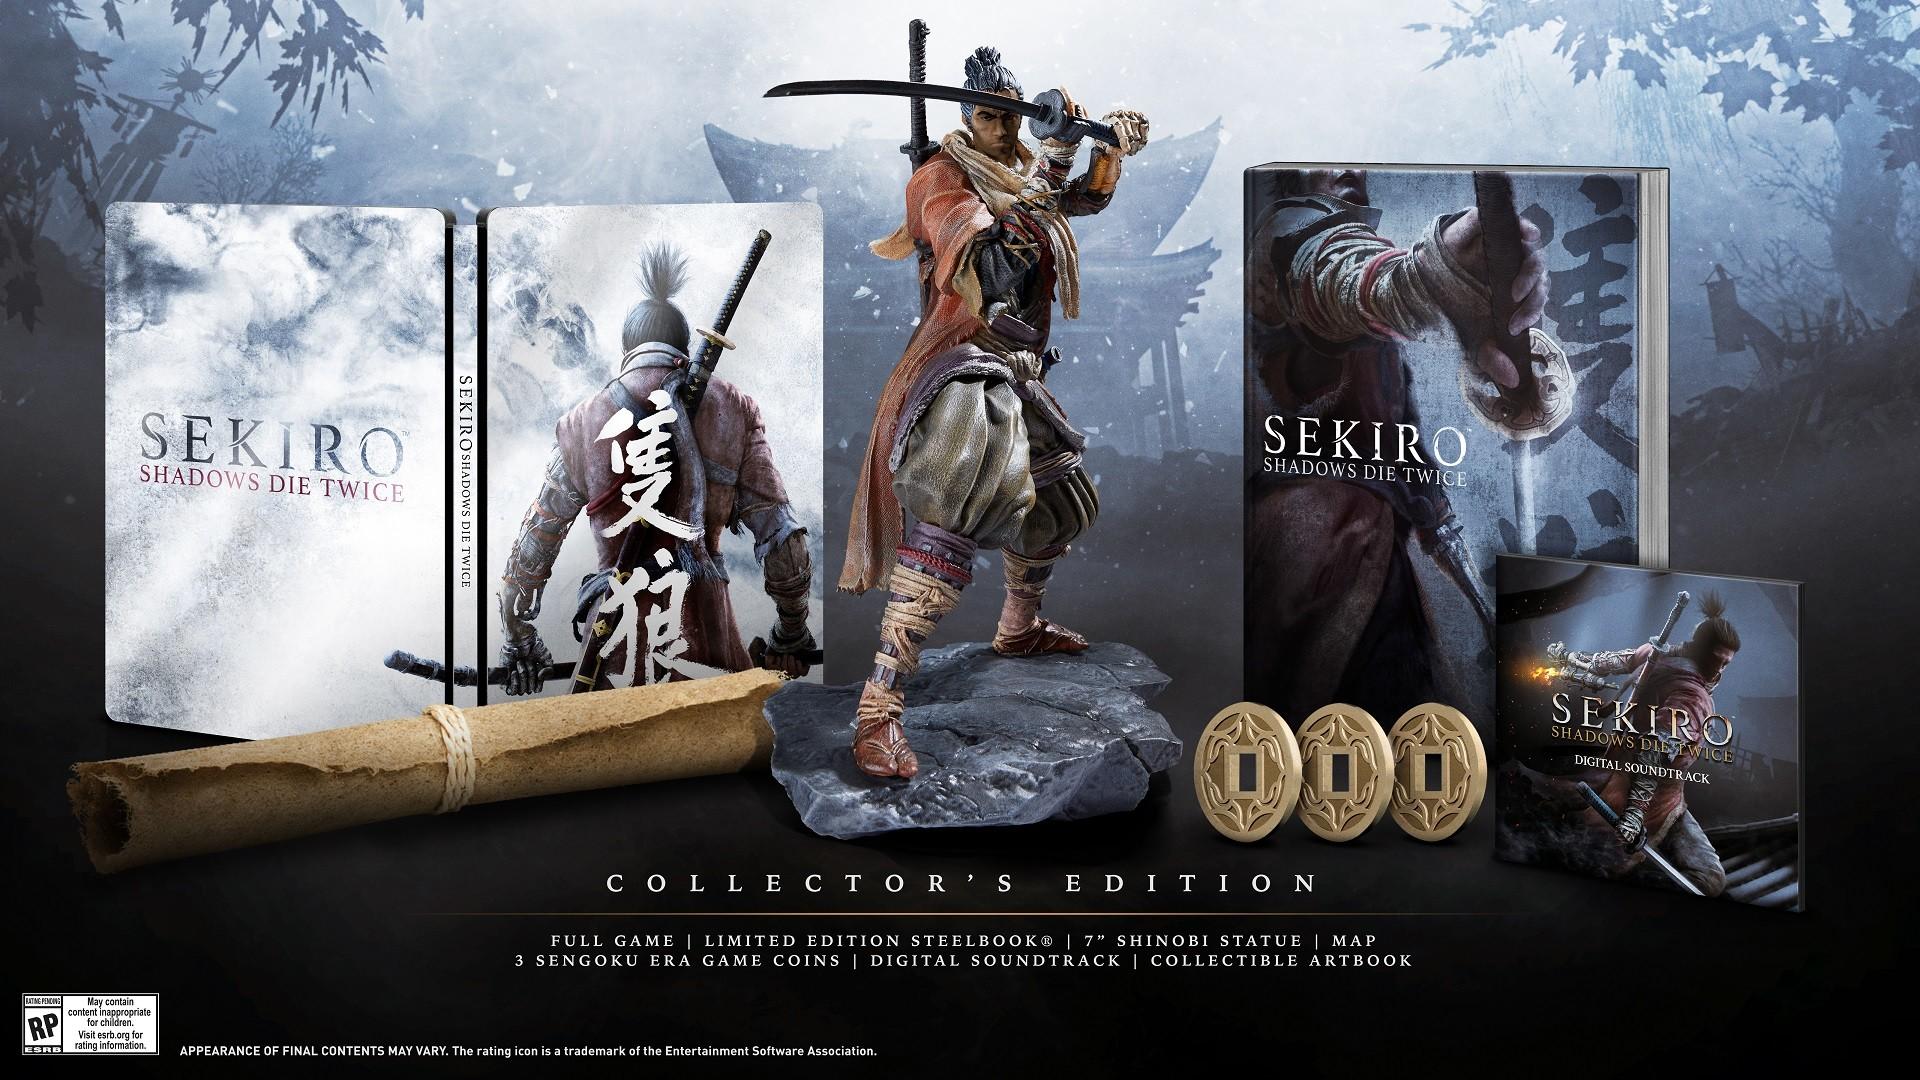 FromSoftware's new game Sekiro: Shadows Die Twice will launch